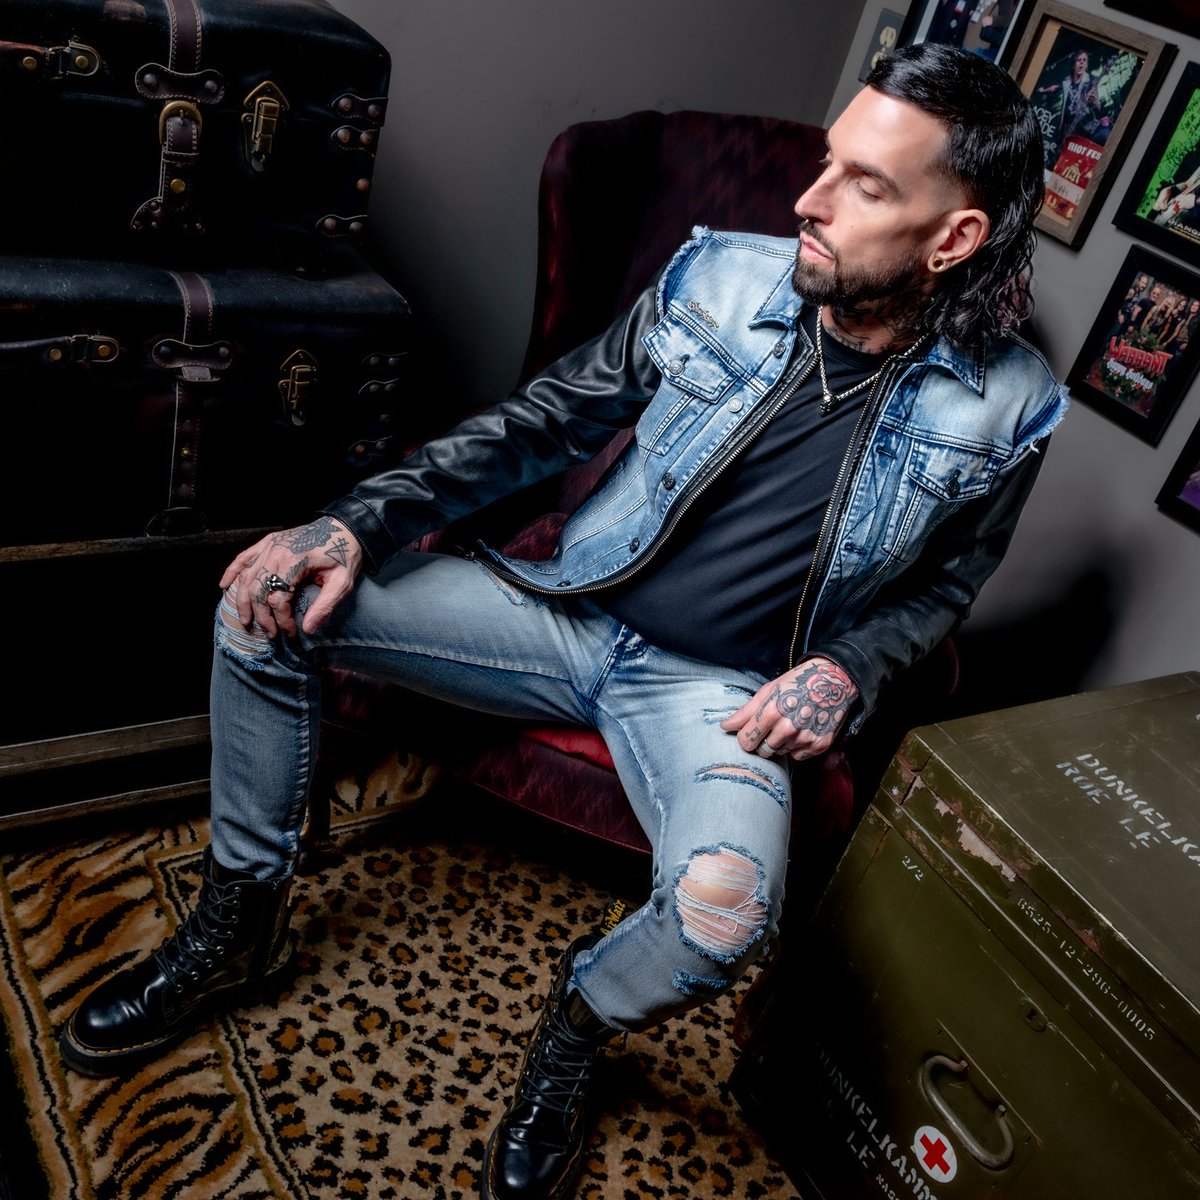 Made for those who love to embrace their rock 'n roll spirit 🤘 , the Whiplash Jacket is not only stylish but incredibly comfortable too! wornstar.com/whiplash #wornstar #whiplash #bikerjacket #motorcyclewear #rocknrollstyle #livelifeloud